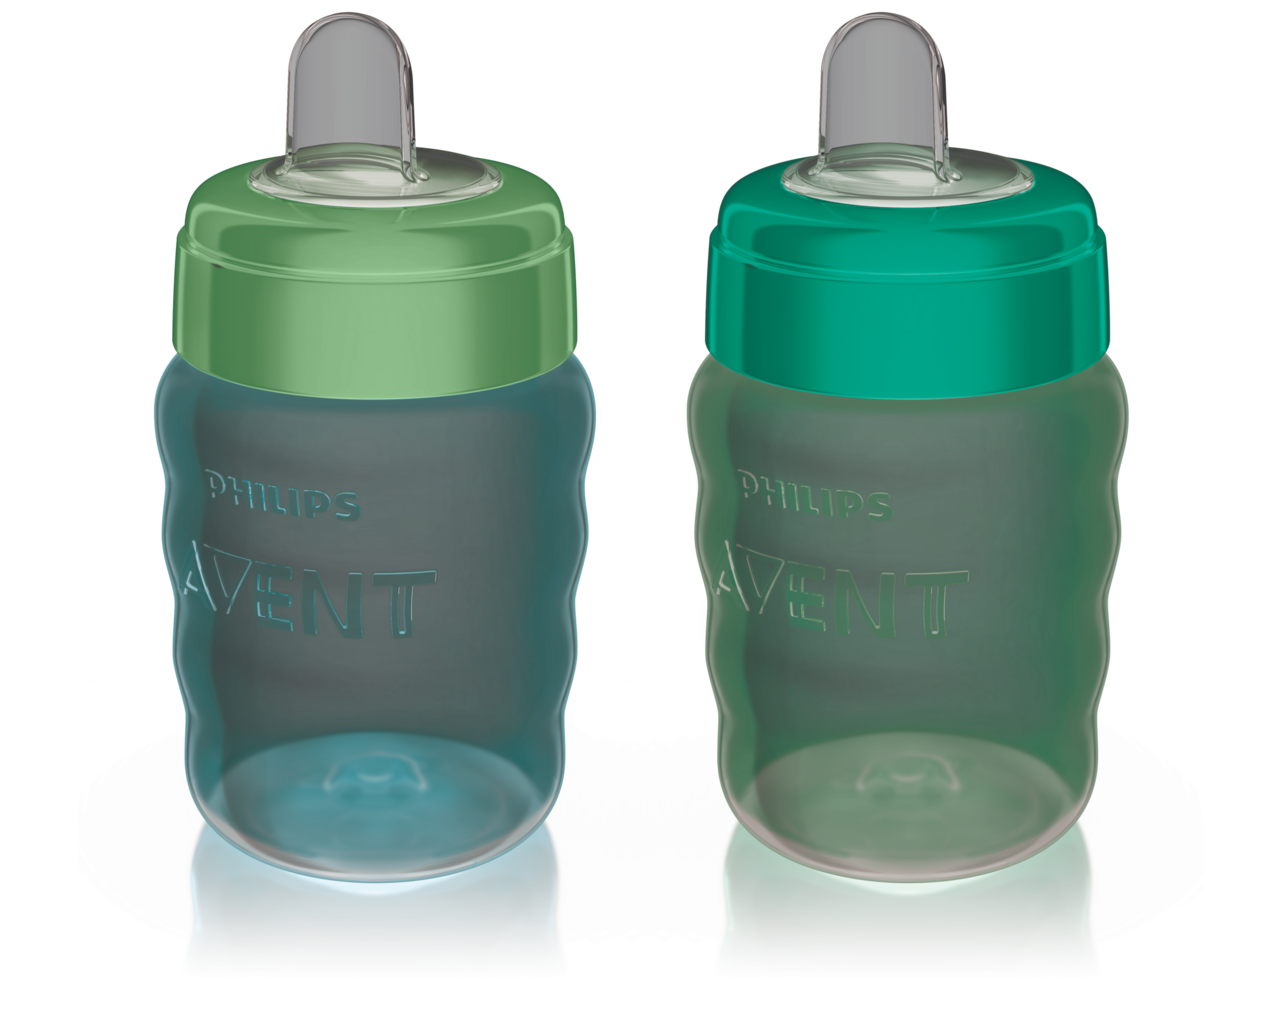 https://media-www.canadiantire.ca/product/automotive/car-care-accessories/child-travel-safety/0468341/philips-avent-soft-sippy-pink-2pk-ae930345-debf-4719-aebb-a6f45d16c1dc.png?imdensity=1&imwidth=640&impolicy=mZoom